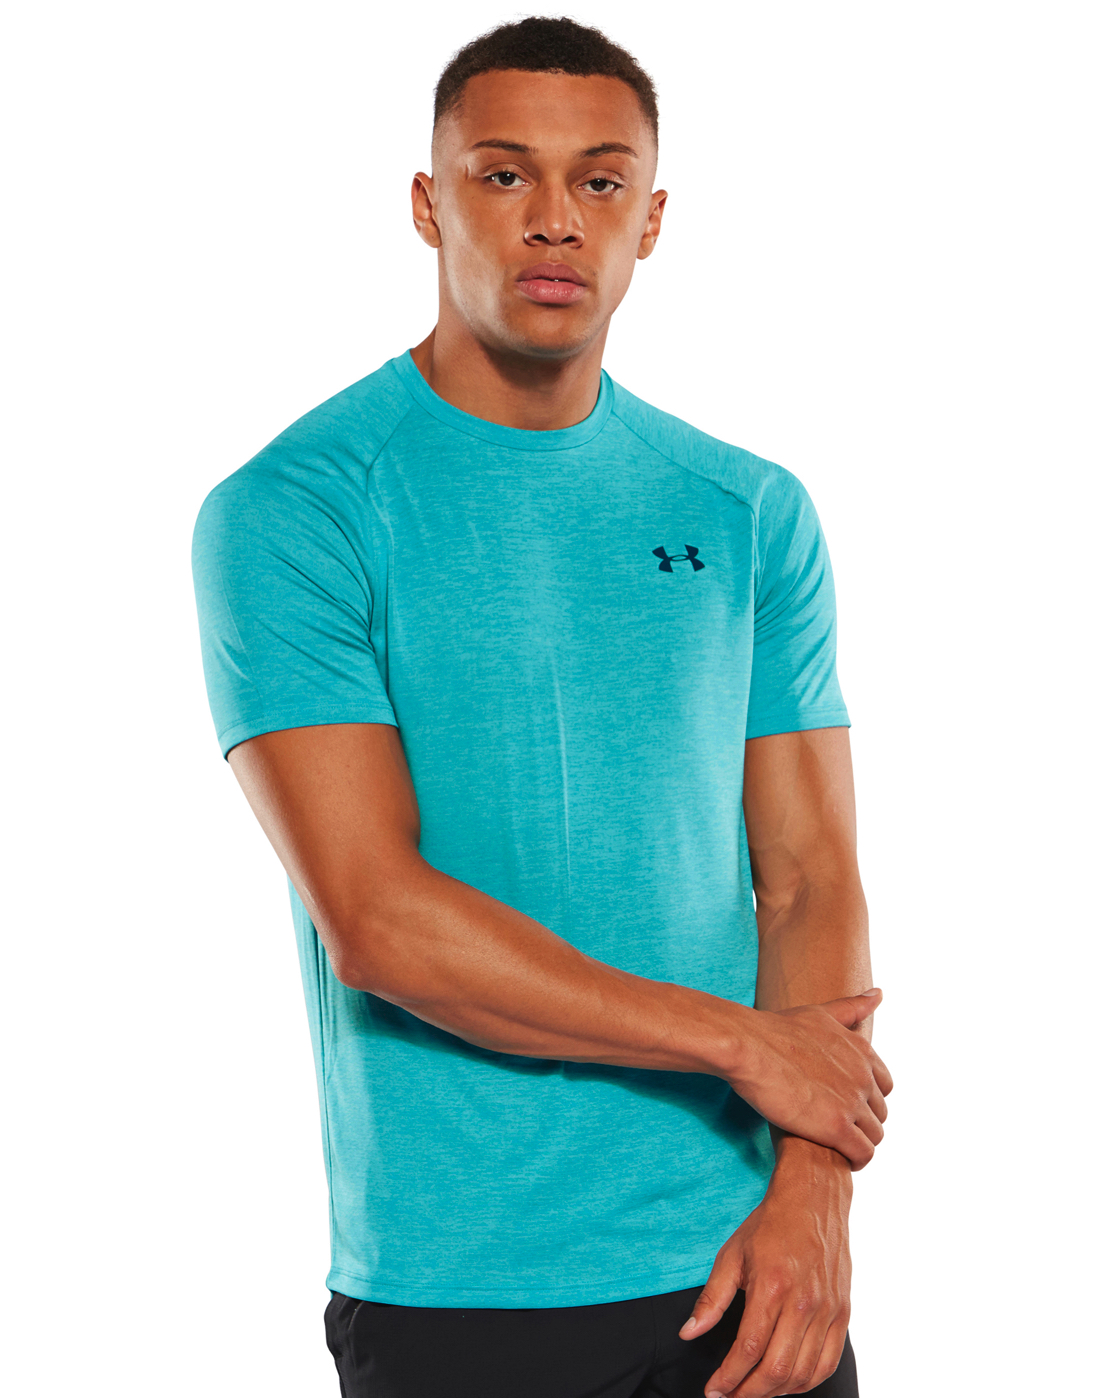 Men's Blue Under Armour Tech Tee | Life Style Sports